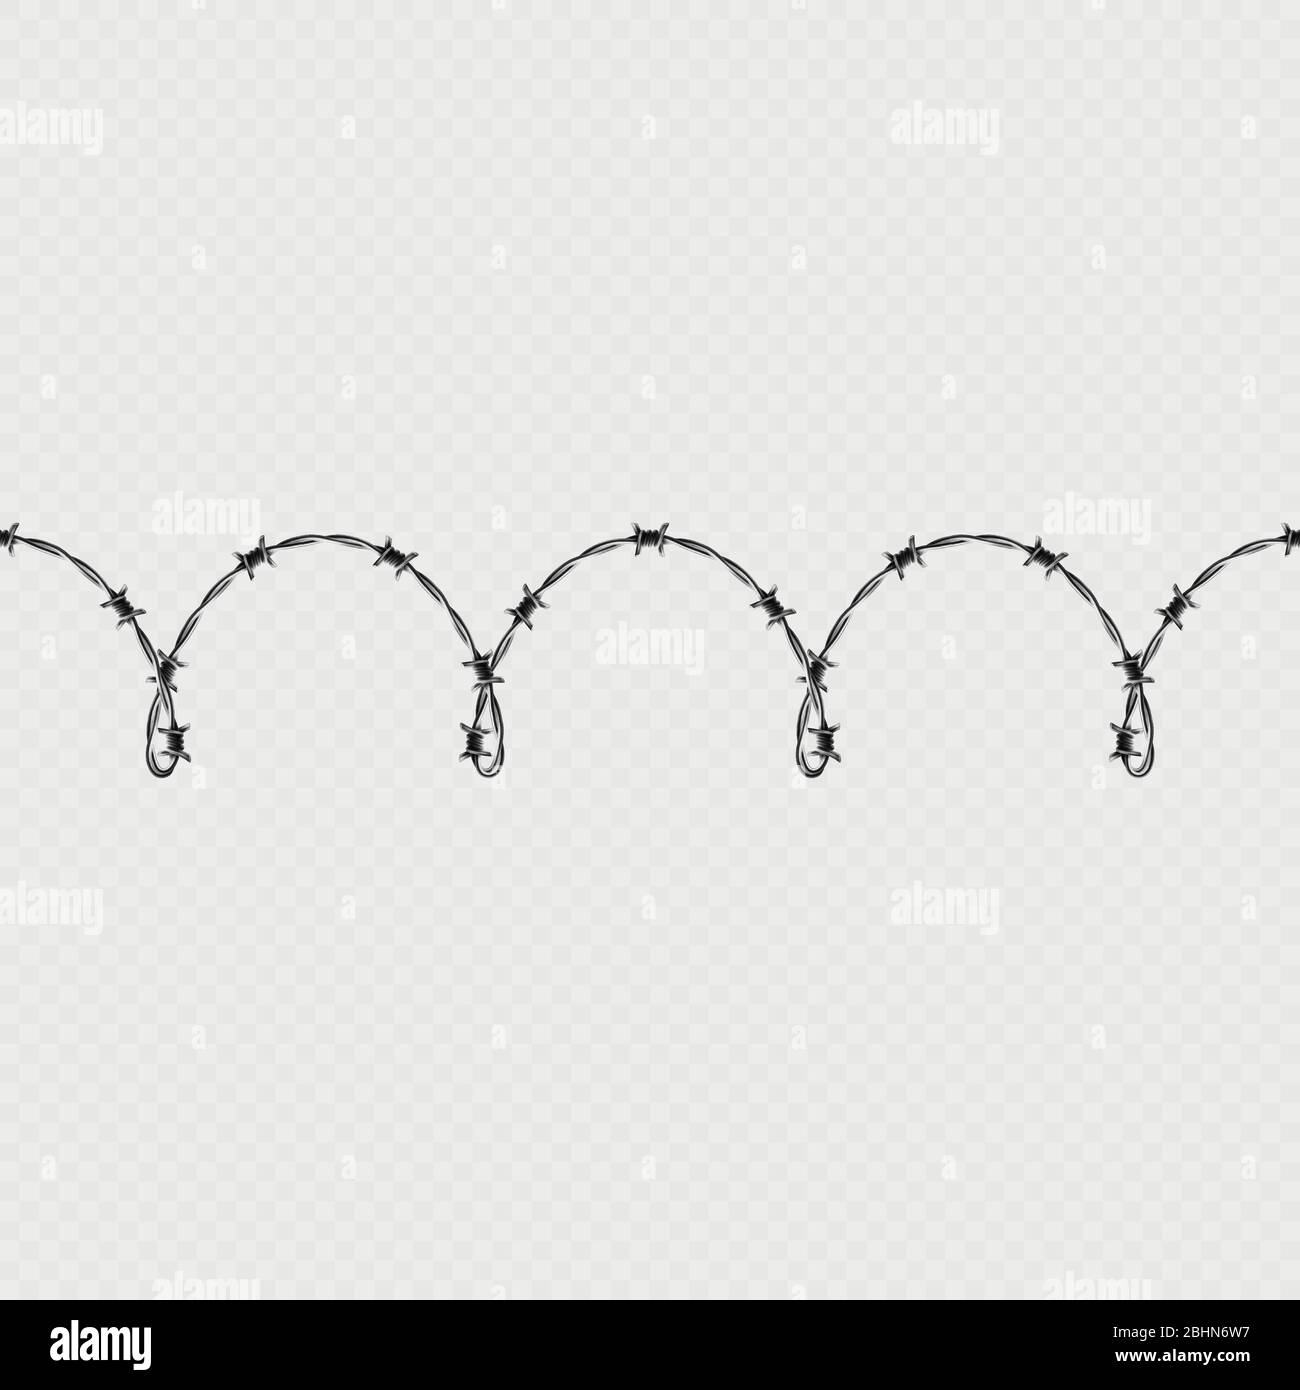 Metal barbed wire horizontal seamless border template and elements object. EPS 10 Stock Vector